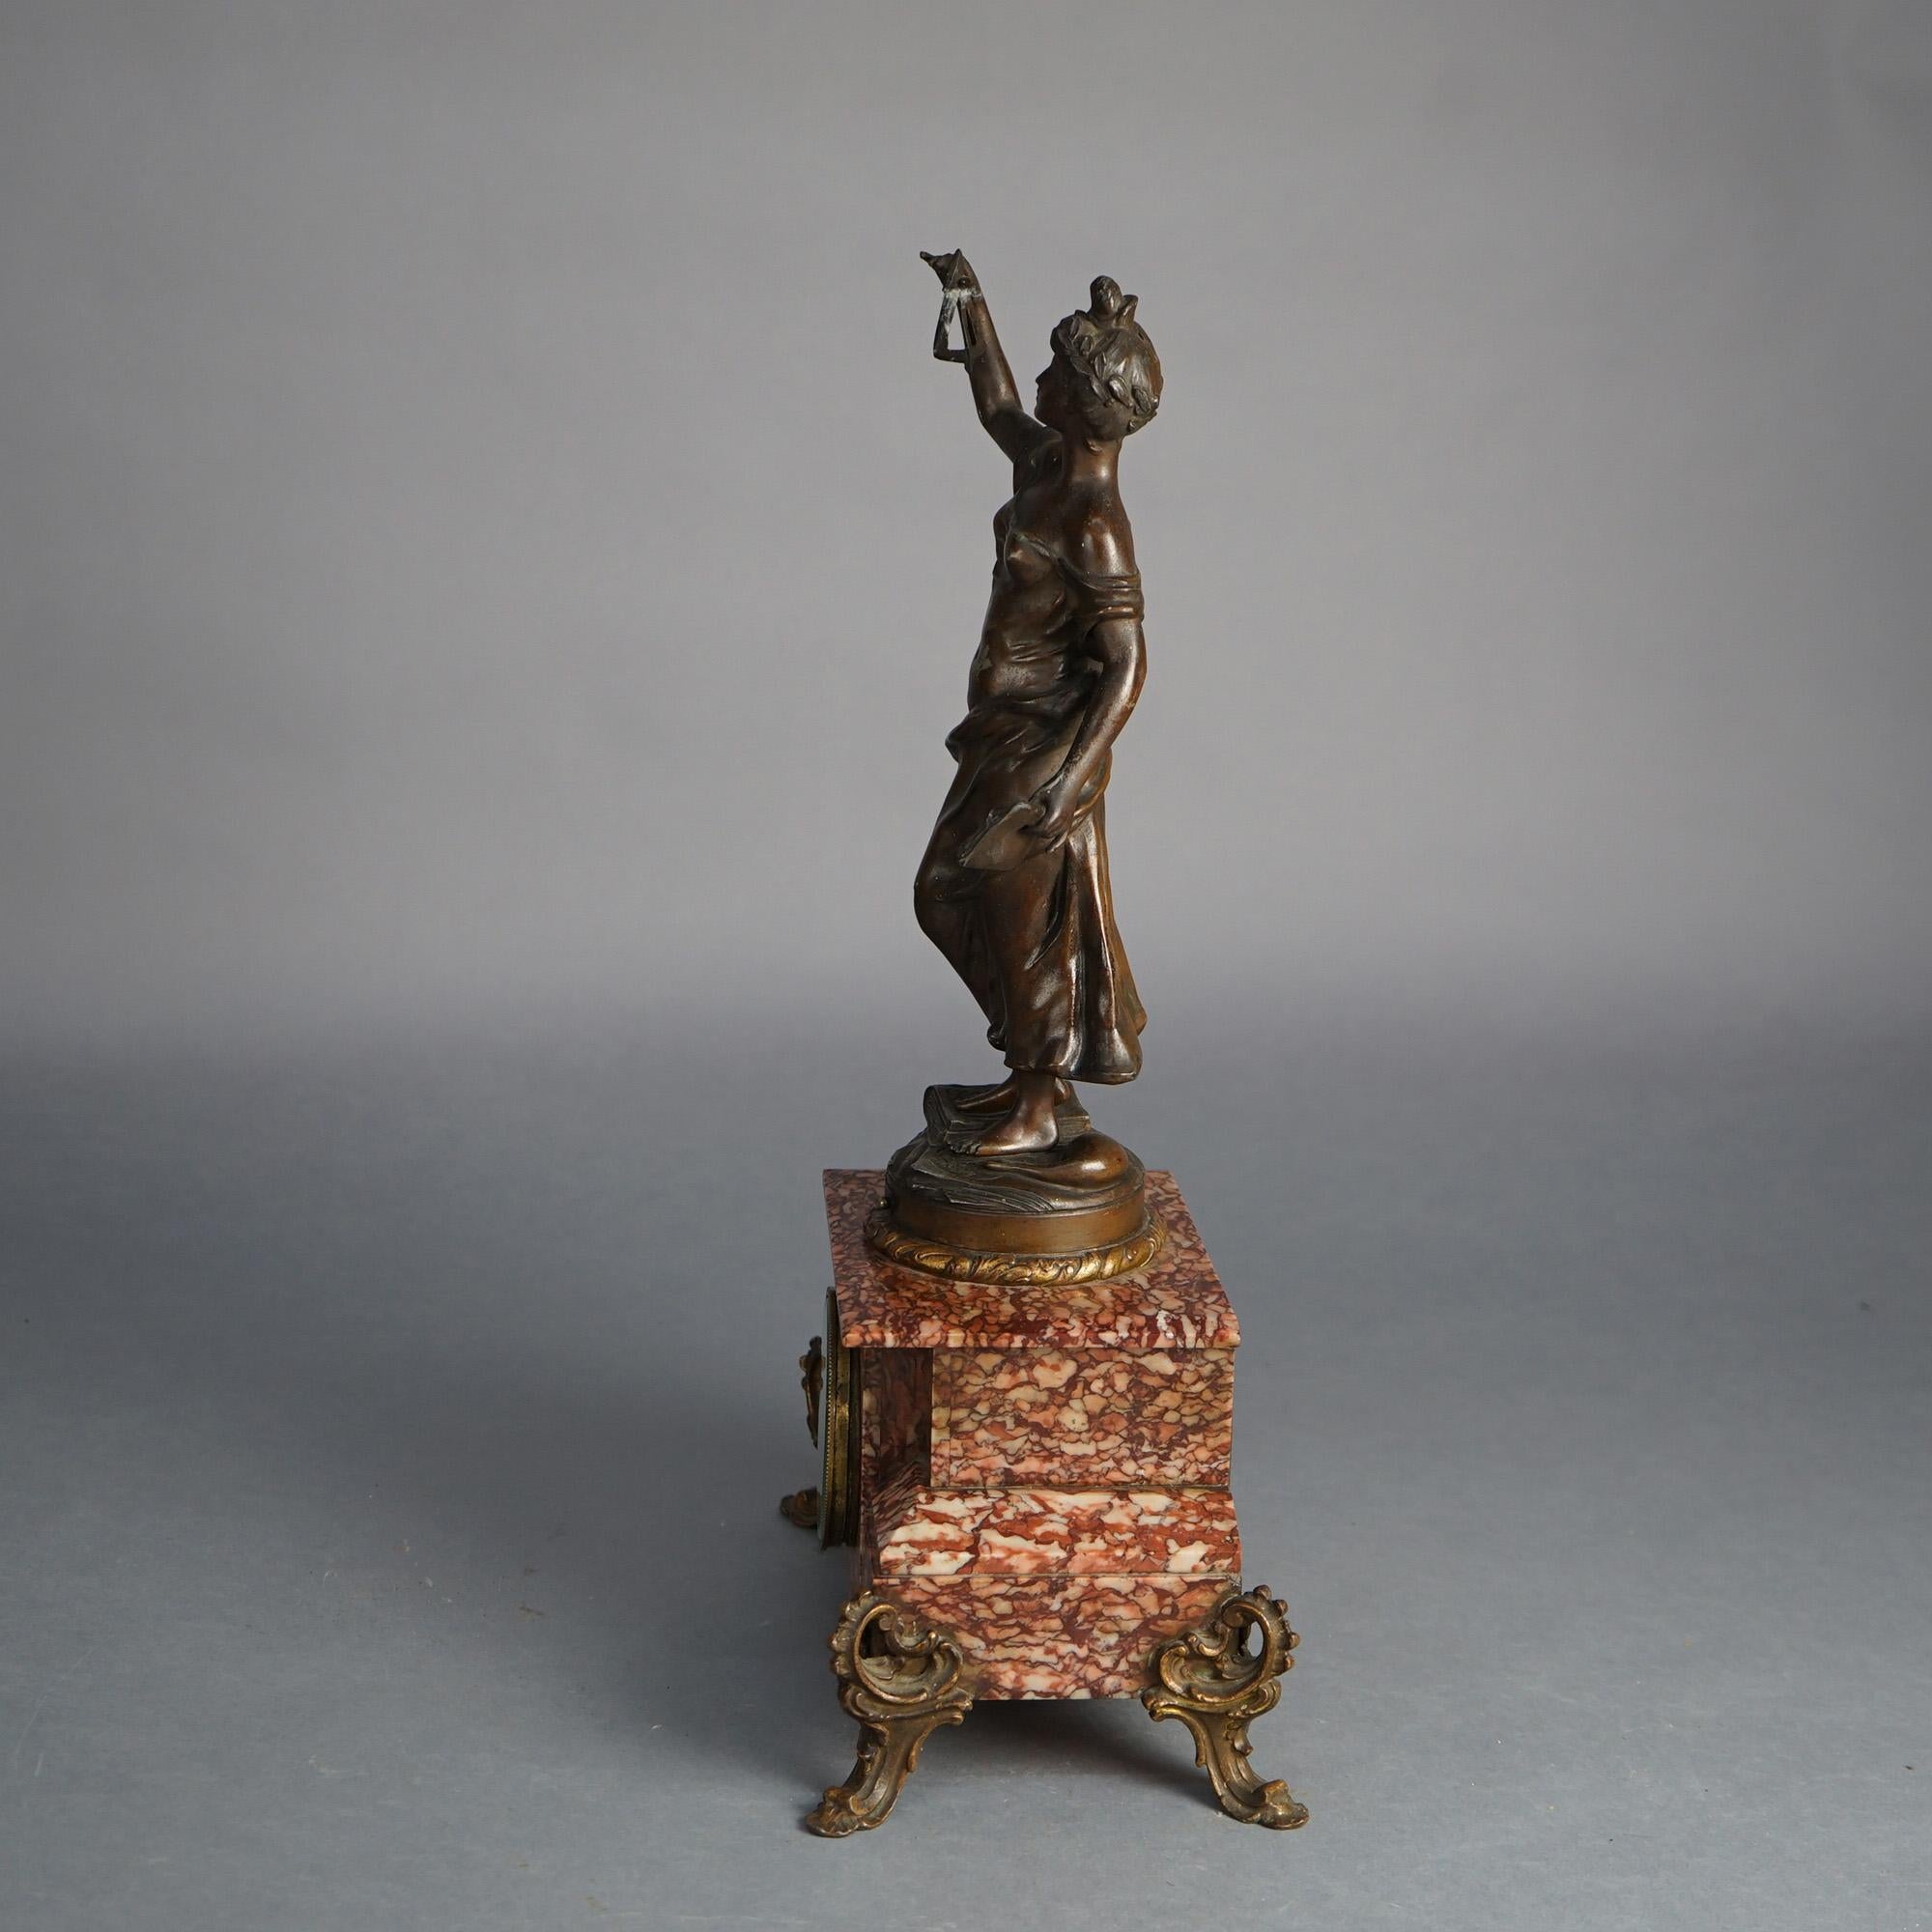 Antique French Scientia, Figural Bronzed Metal & Rouge Marble Footed Clock C1890 For Sale 3